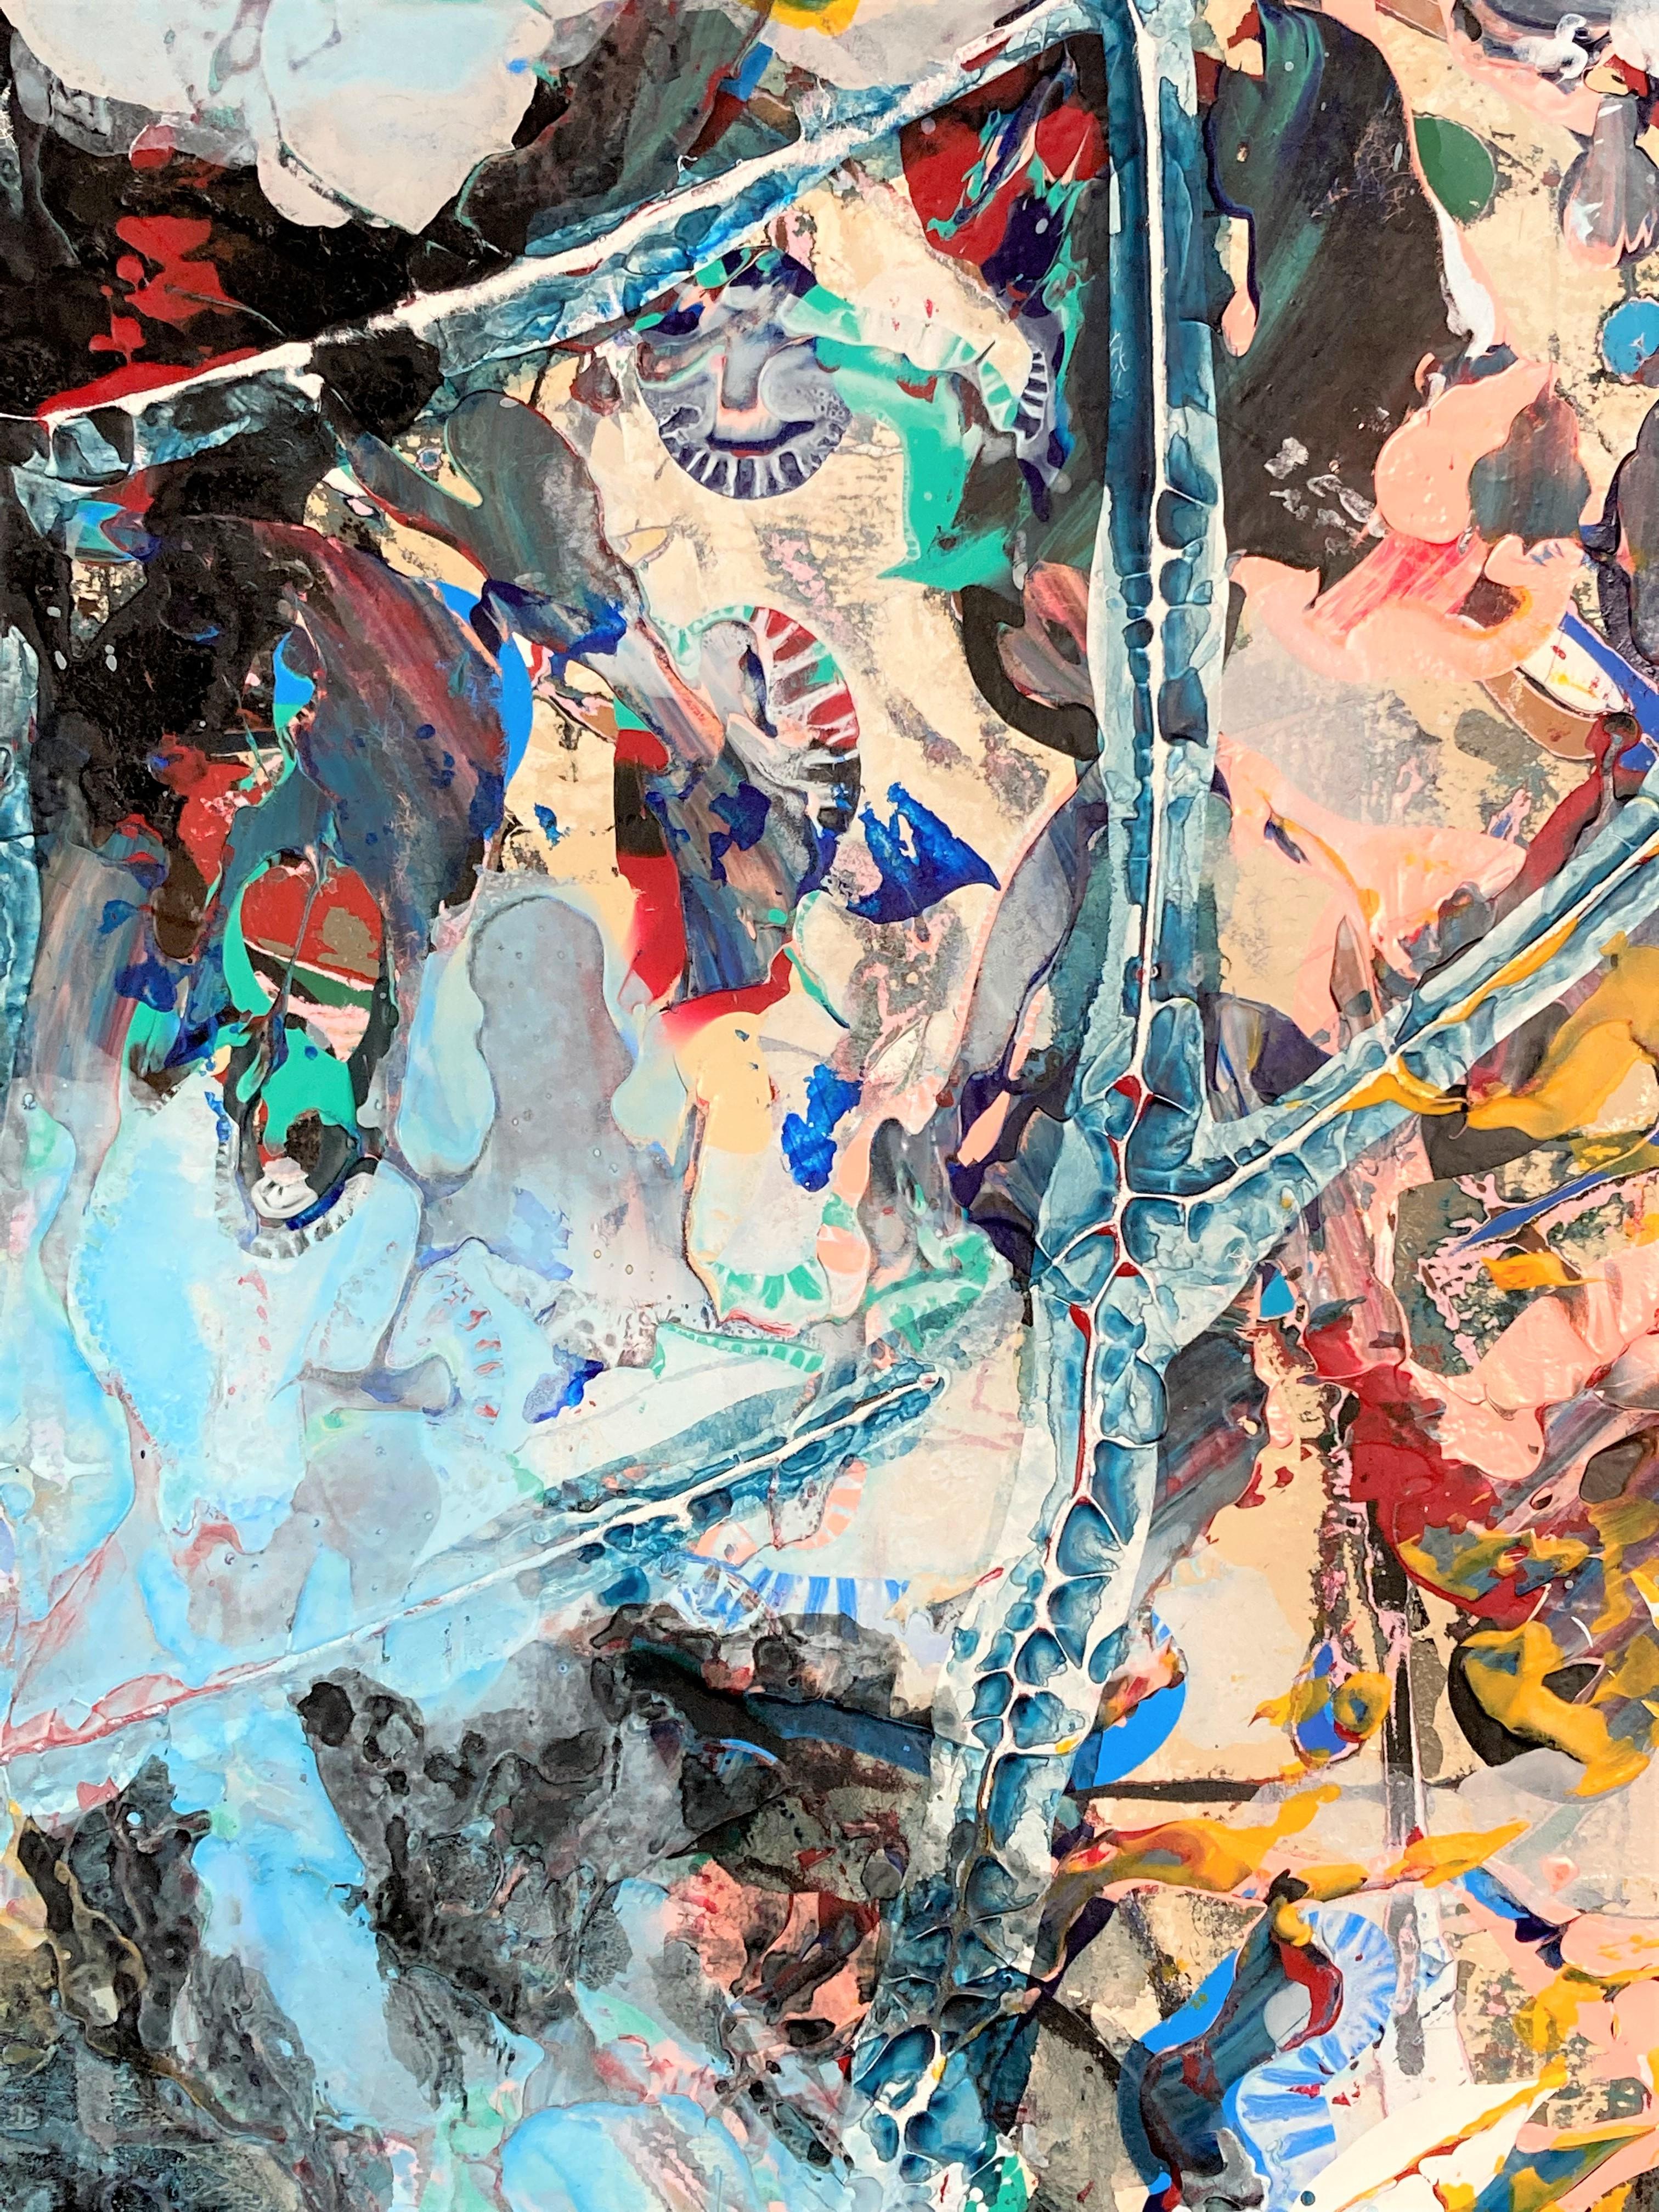 <p>Artist Comments<br>Part of artist Gary J. Noland Jr.'s ongoing Mad Mad World series. An expressive abstract with multiple layers of paint expressed in waves predominantly in blue, white, and black. Upon closer look, meticulous details peek